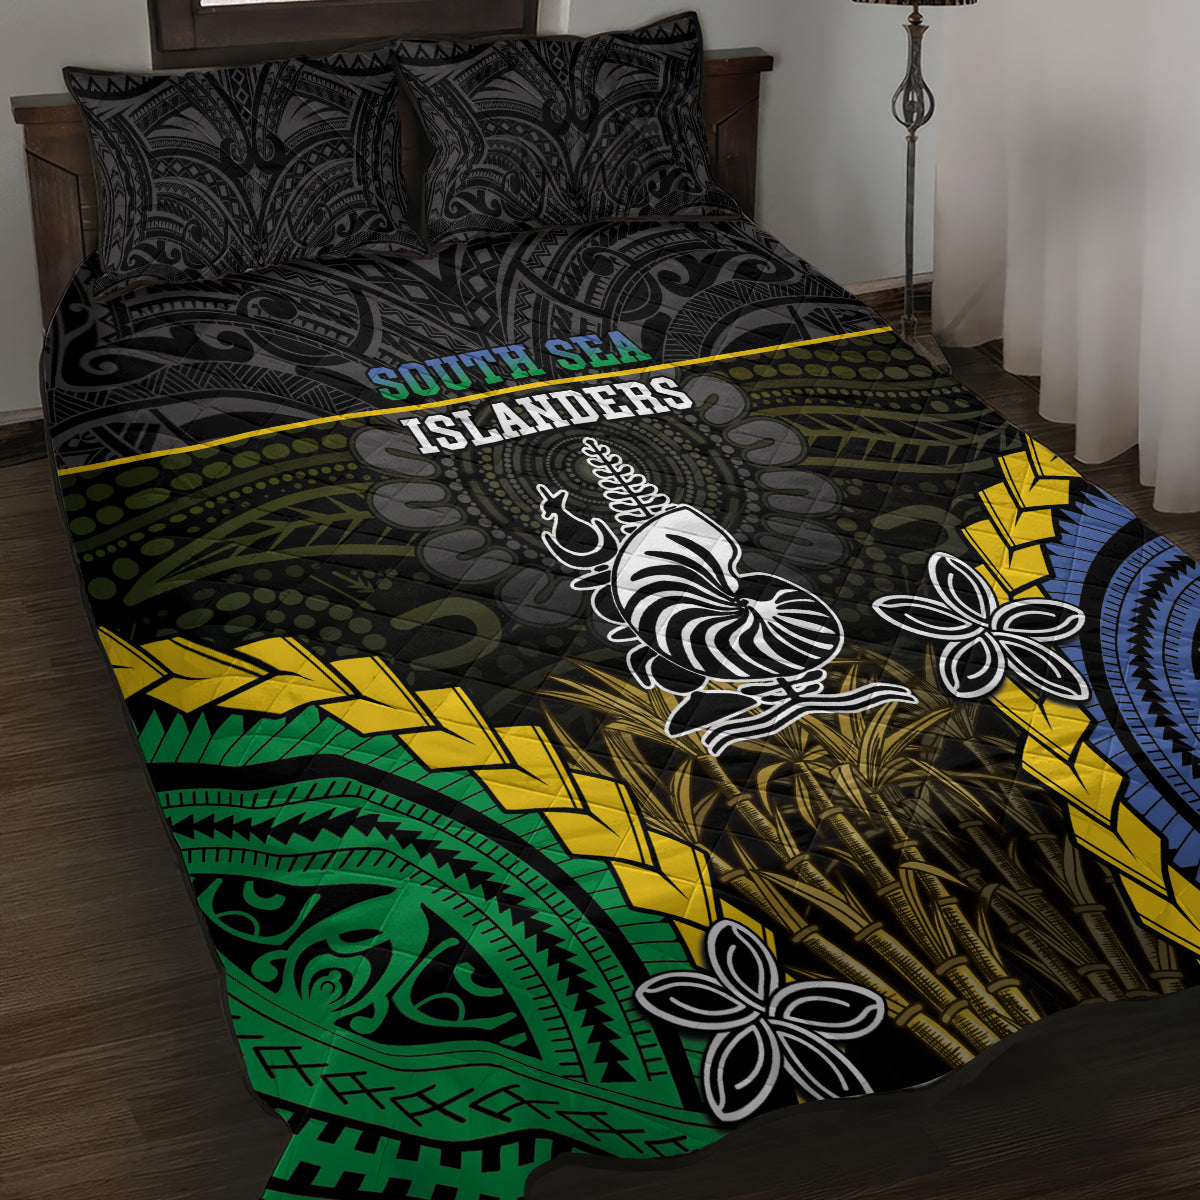 South Sea Islanders And New Caledonia Quilt Bed Set Kanakas Polynesian Pattern